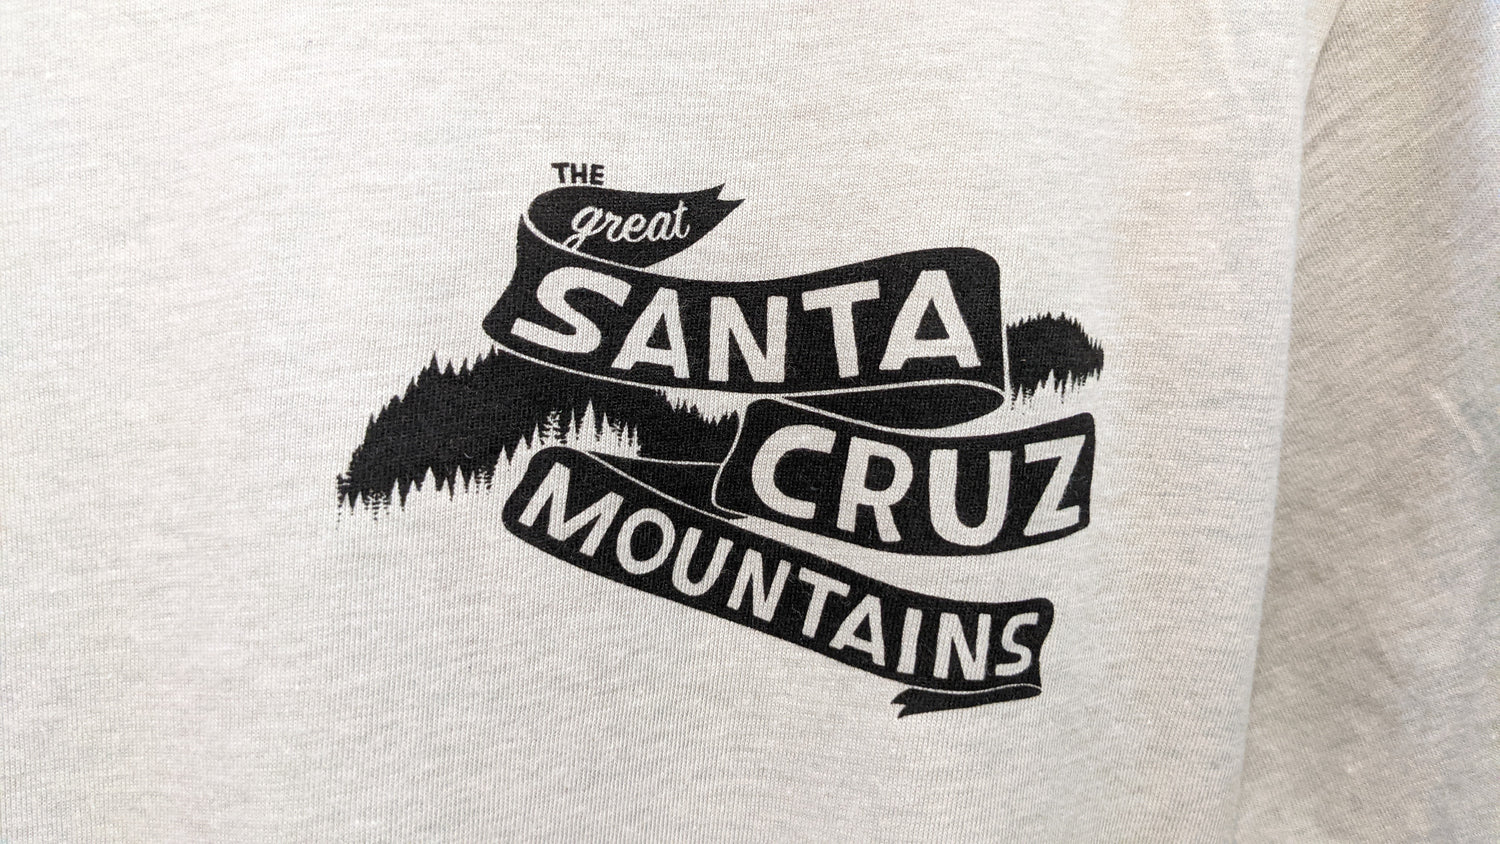 Close up of shirt front in light gray by Great Santa Cruz Mountains